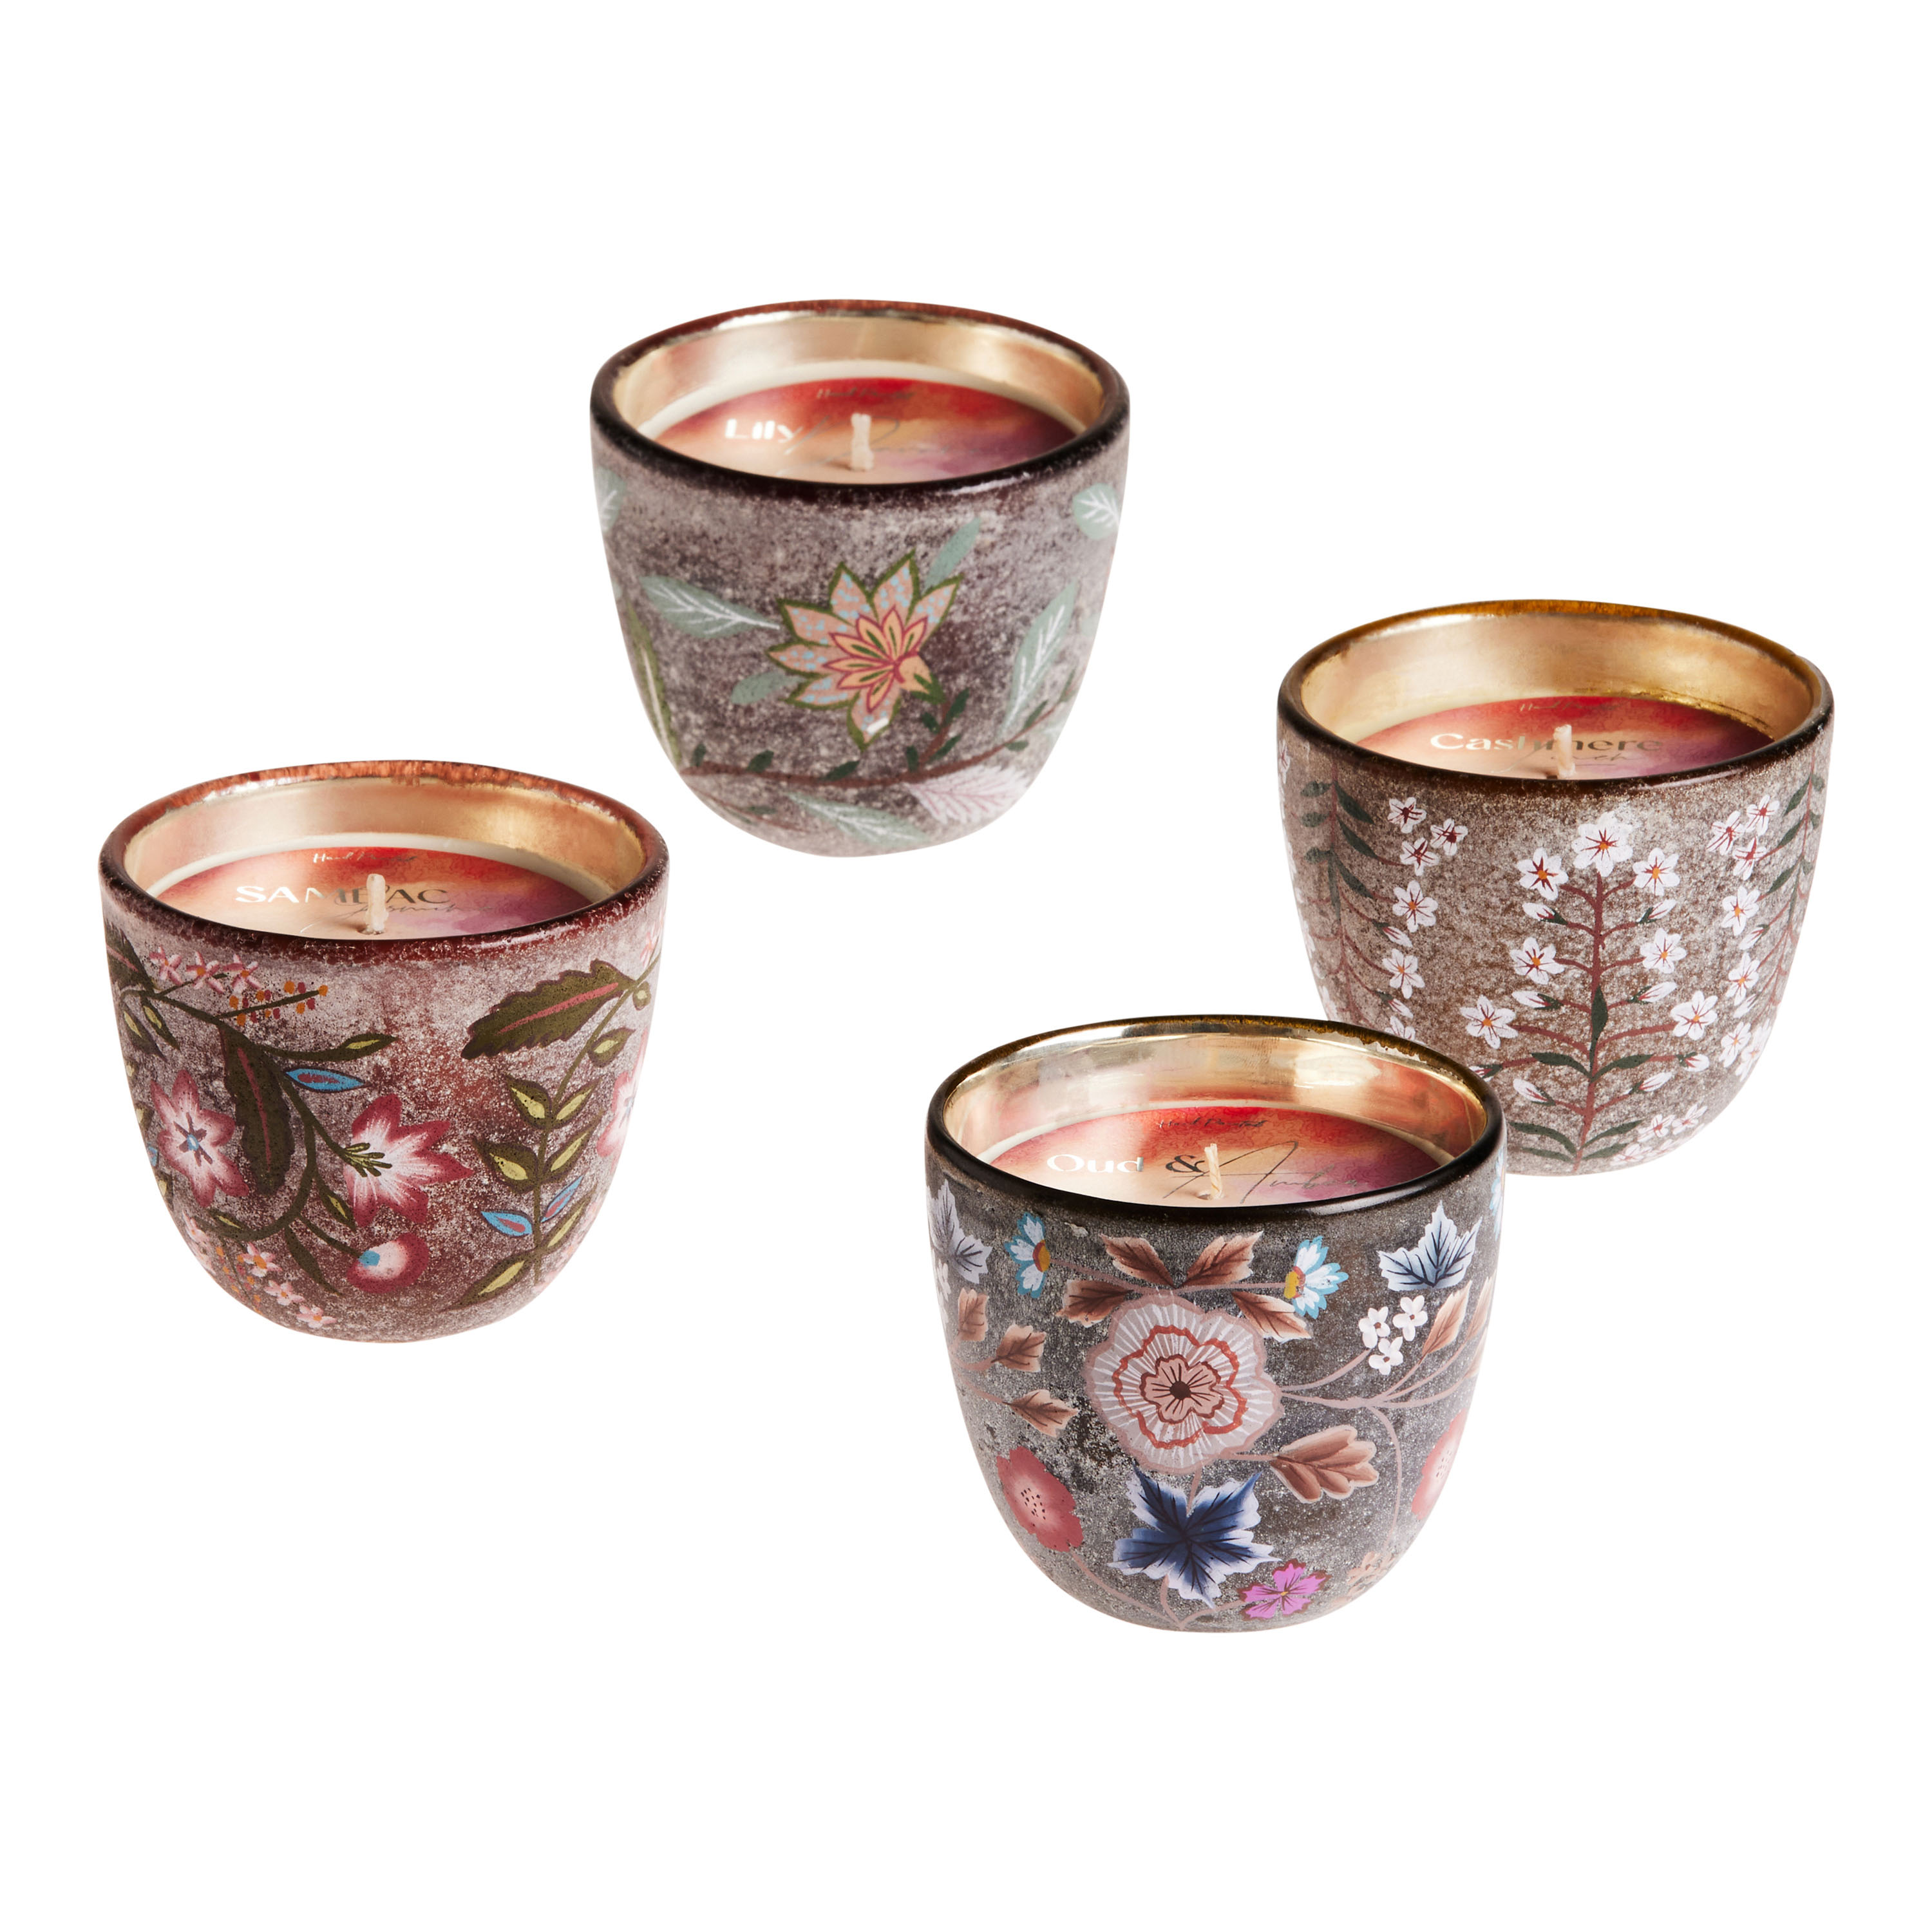 Painted - Scented Candle Market Glass Handmade World Floral